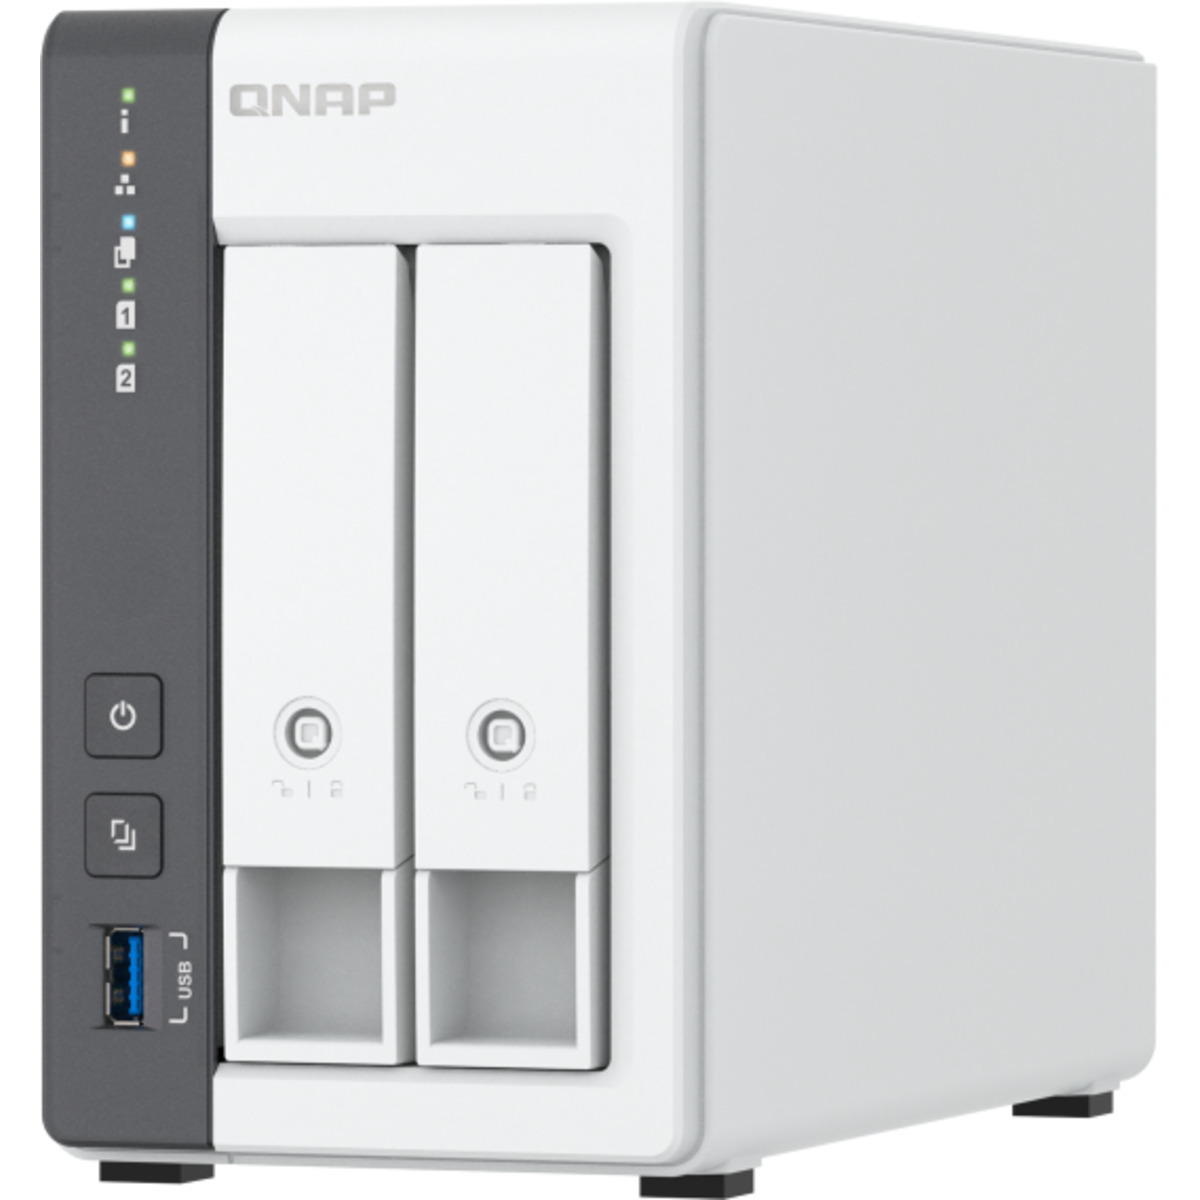 QNAP TS-216G 16tb 2-Bay Desktop Personal / Basic Home / Small Office NAS - Network Attached Storage Device 2x8tb Seagate IronWolf Pro ST8000NT001 3.5 7200rpm SATA 6Gb/s HDD NAS Class Drives Installed - Burn-In Tested - ON SALE TS-216G